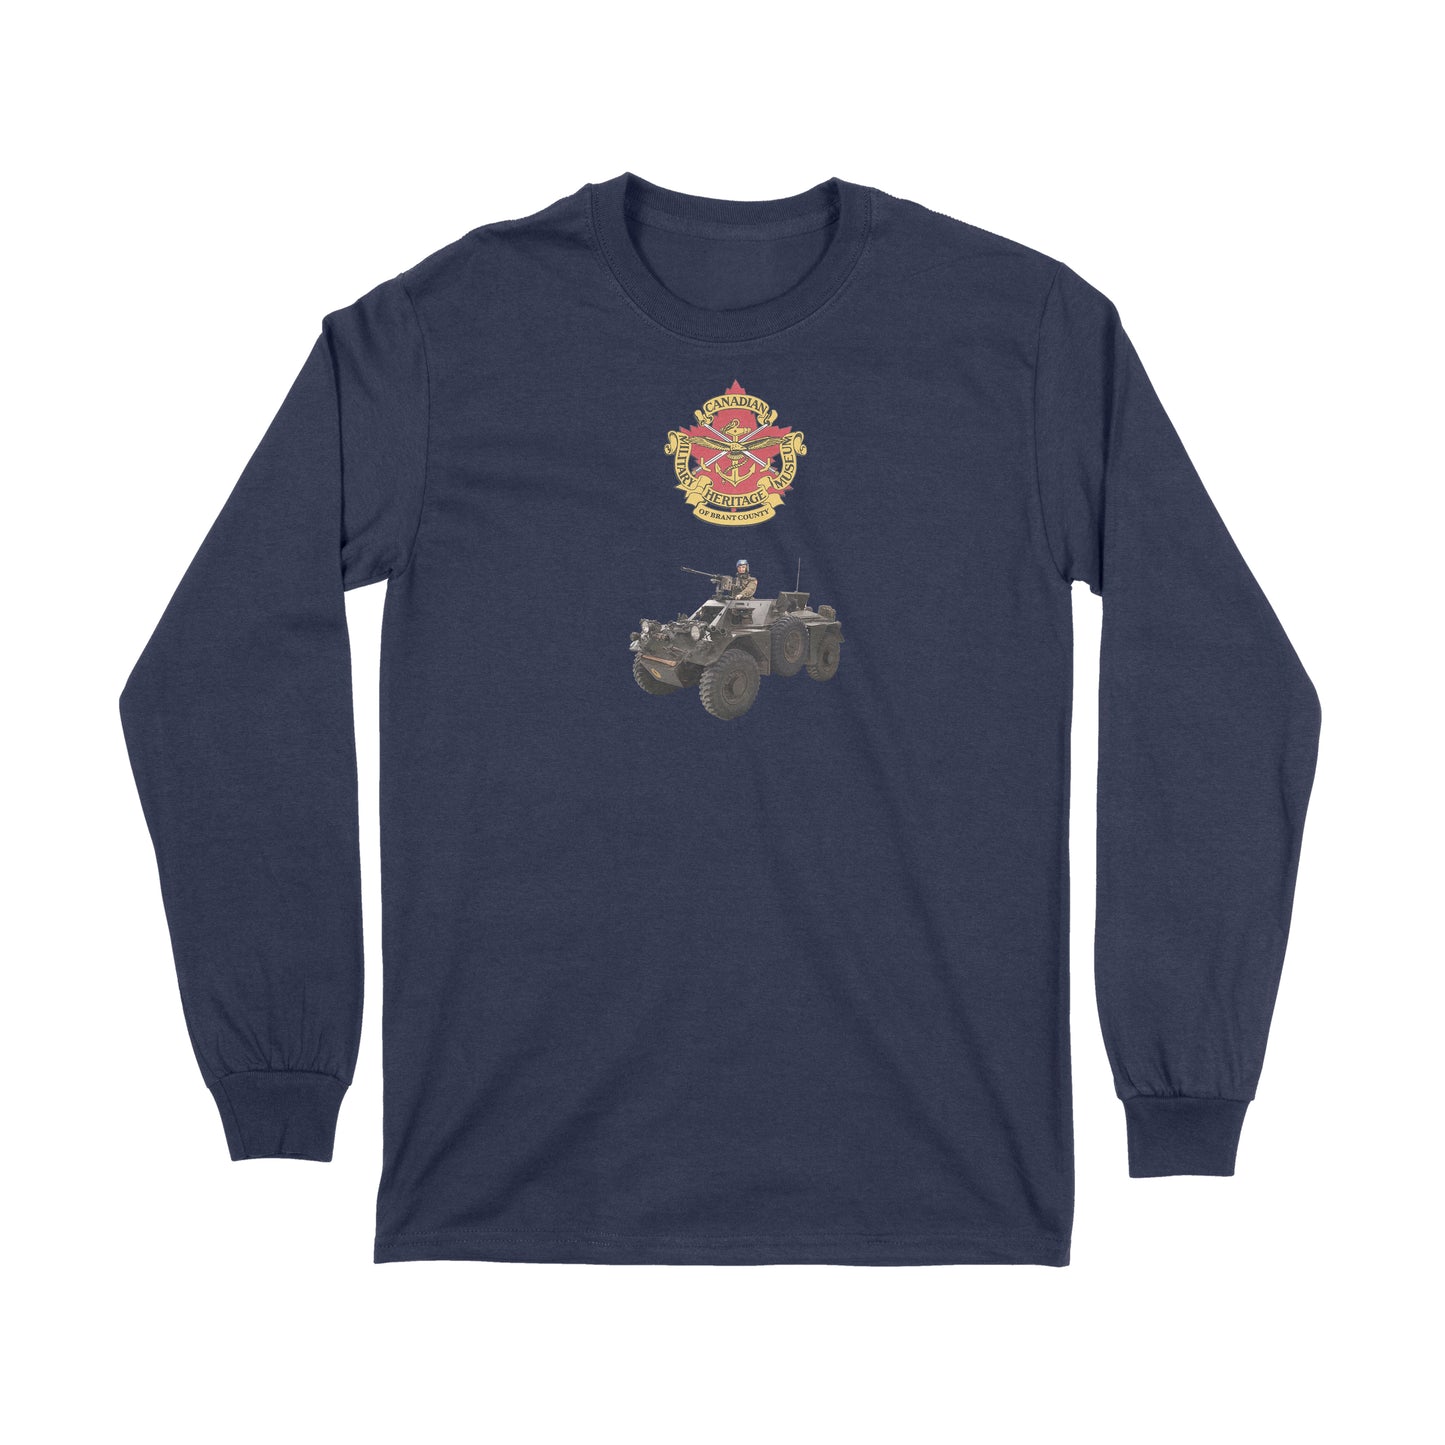 Brantford, Canadian Military Heritage Museum, Fat Dave, Ferret, Long Sleeve, Museum, Navy Blue